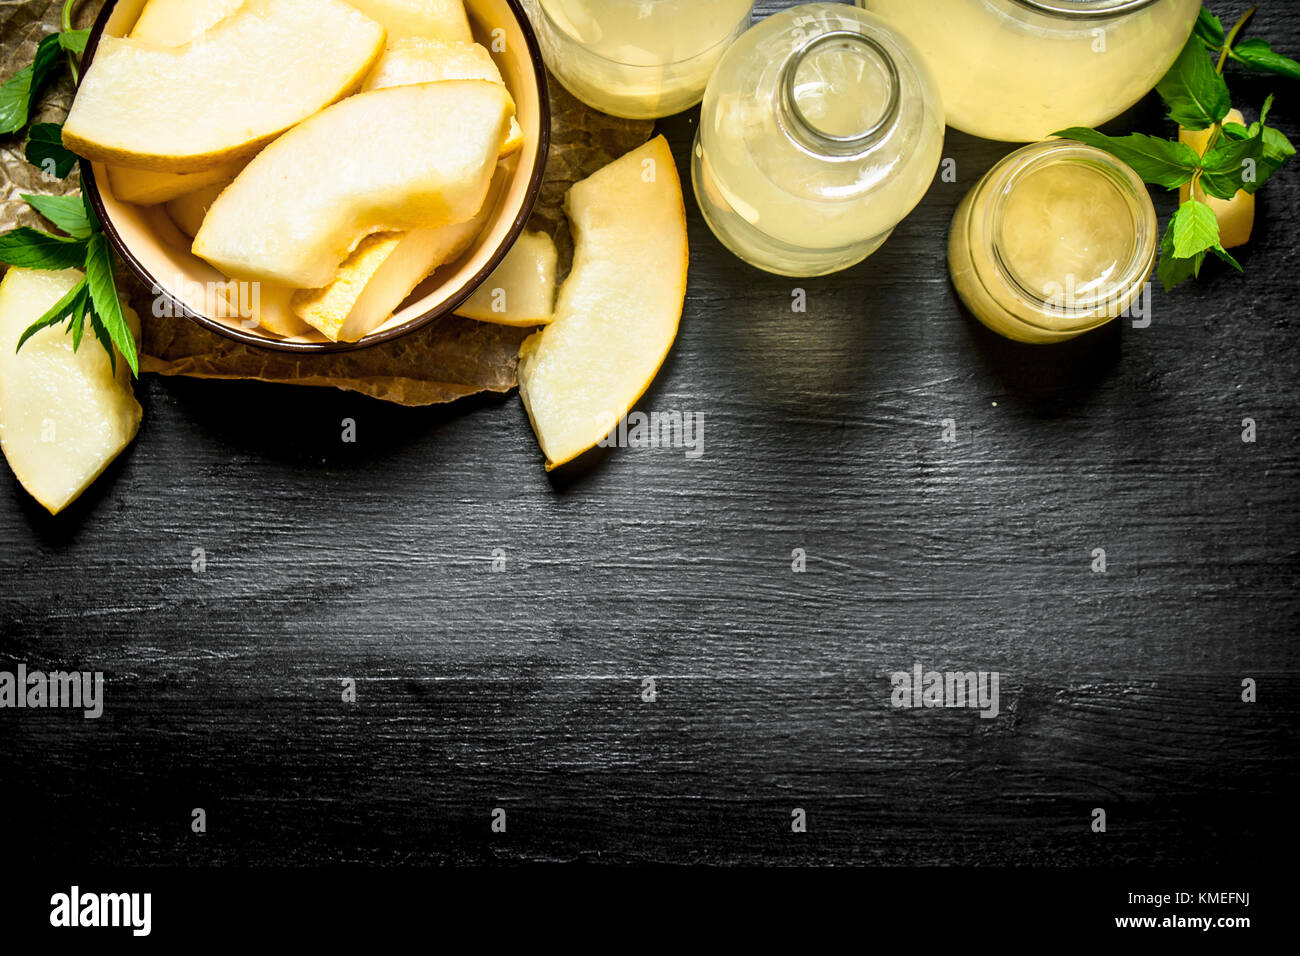 Fresh juice of a melon with branches of fresh mint. On the black wooden table. Stock Photo